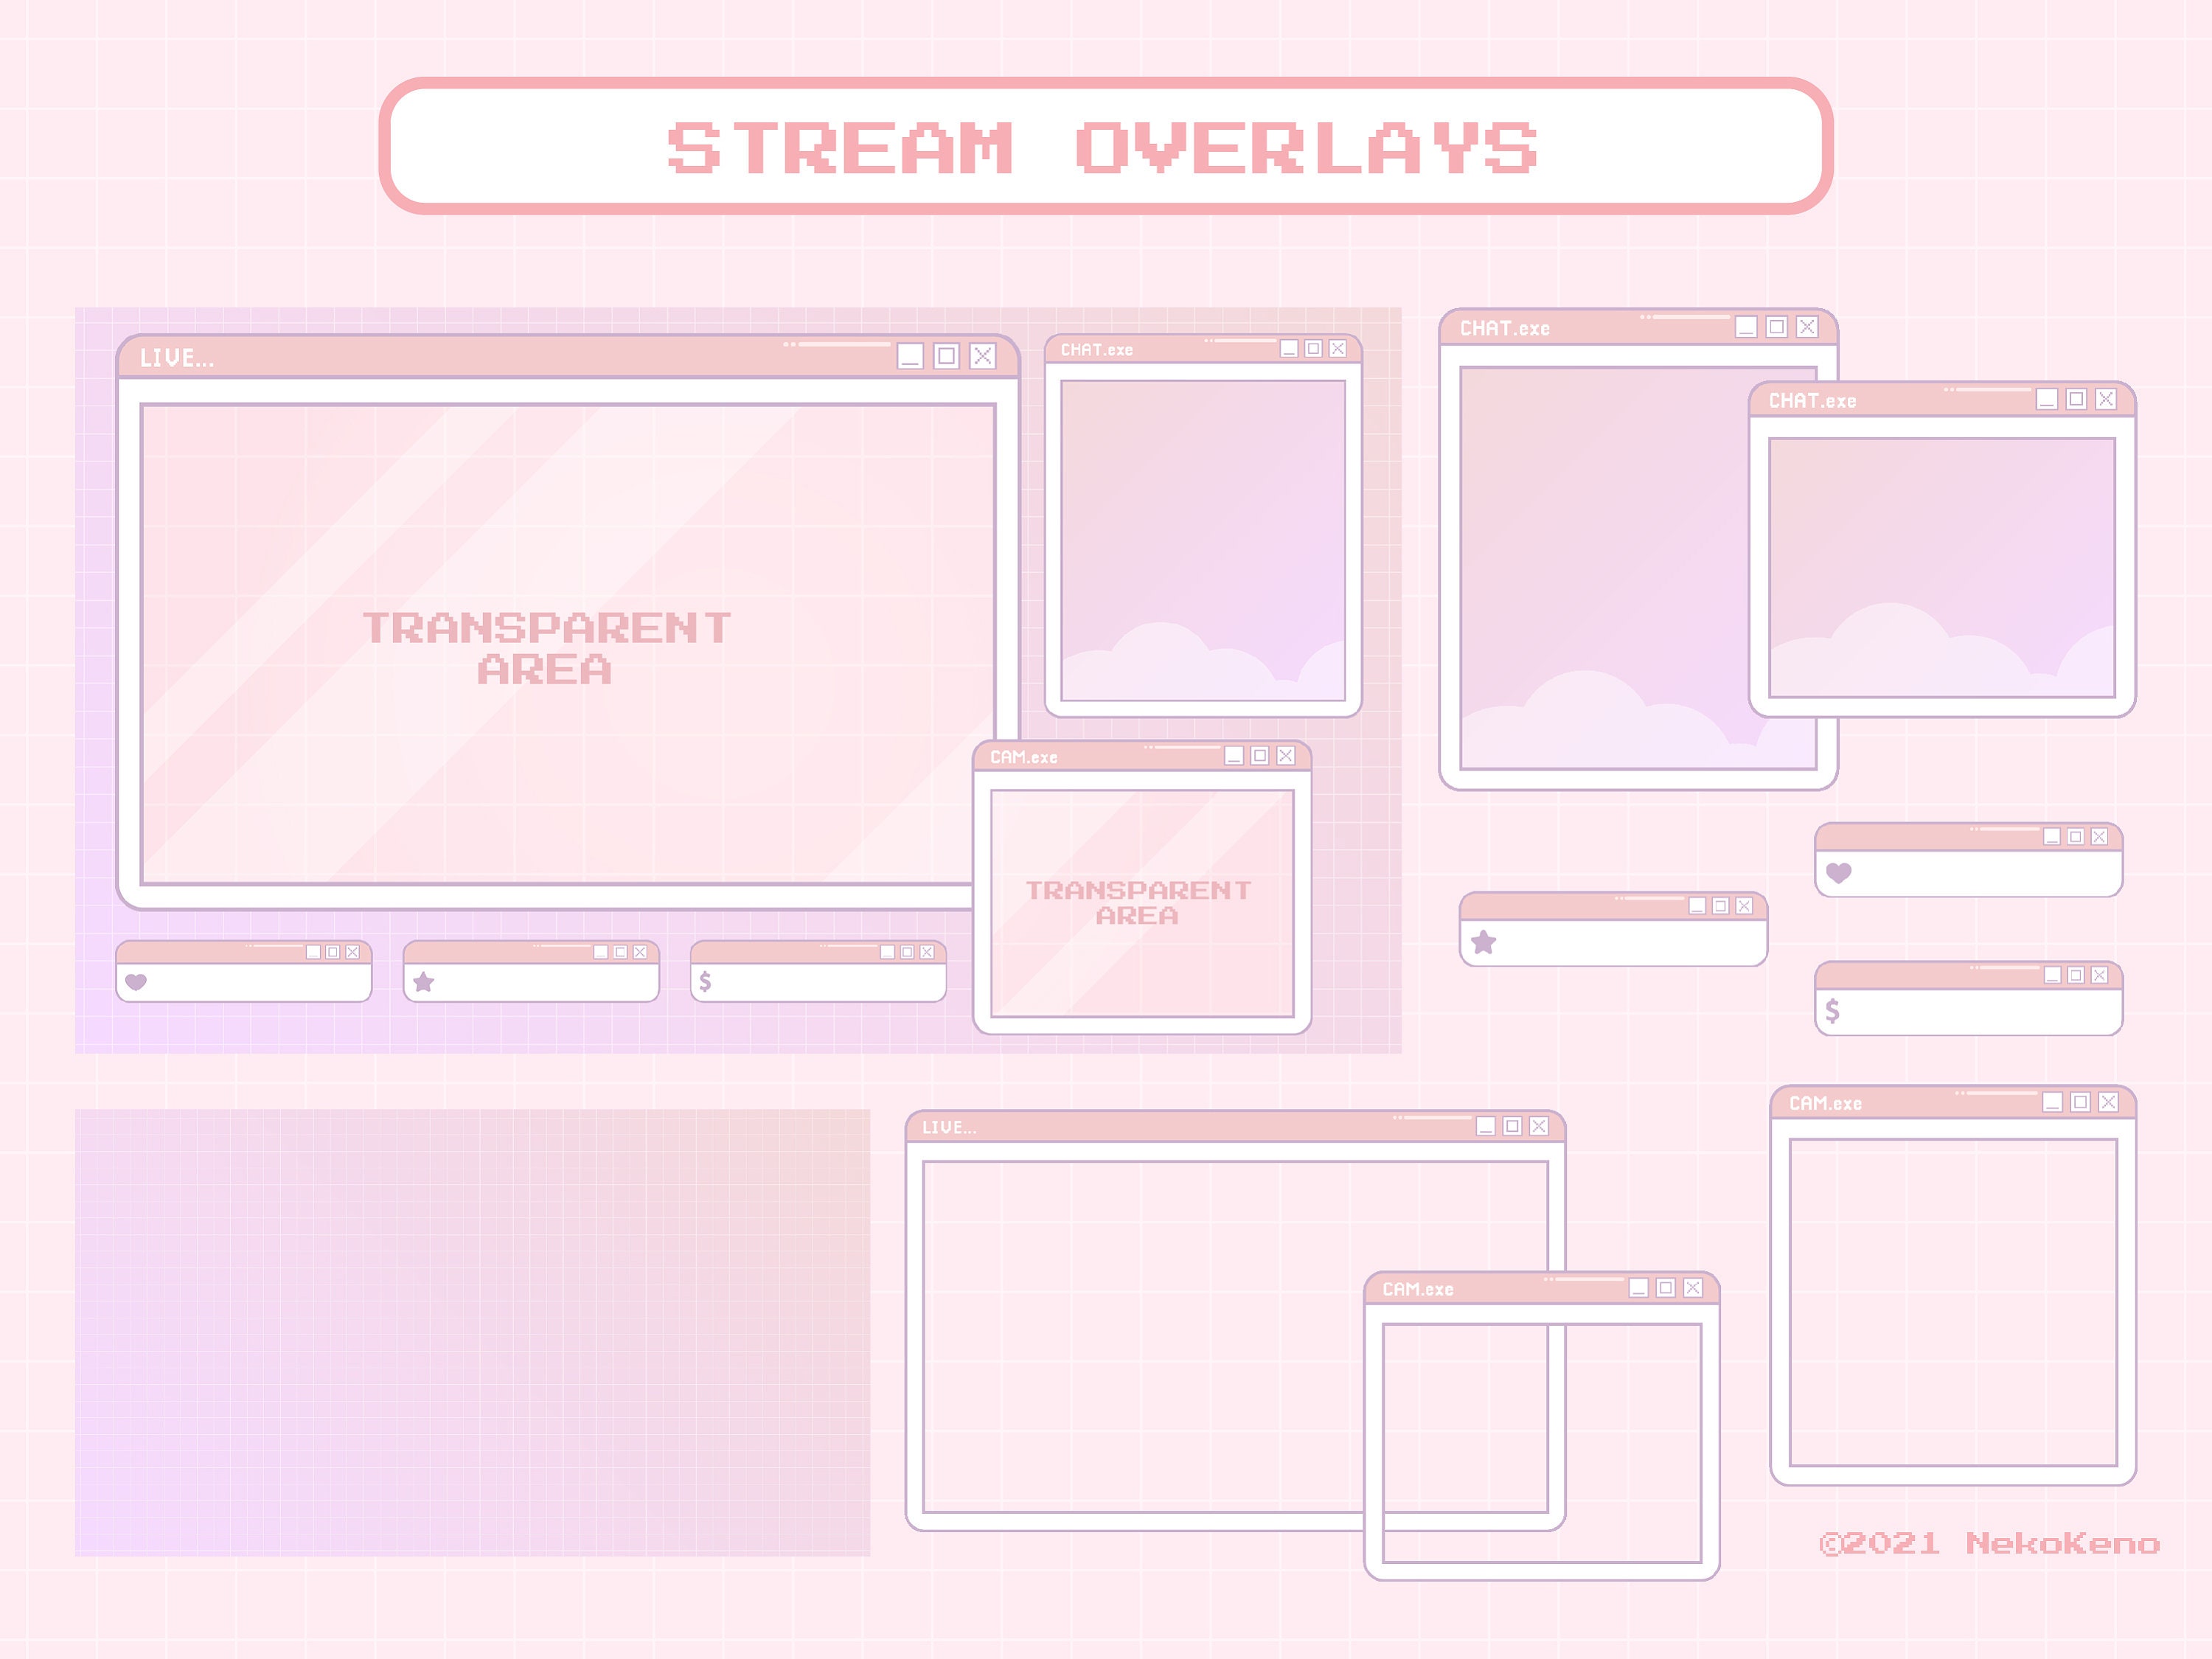 Stream Overlay Package for Twitch Cute Pastel Pink Windows - Etsy UK